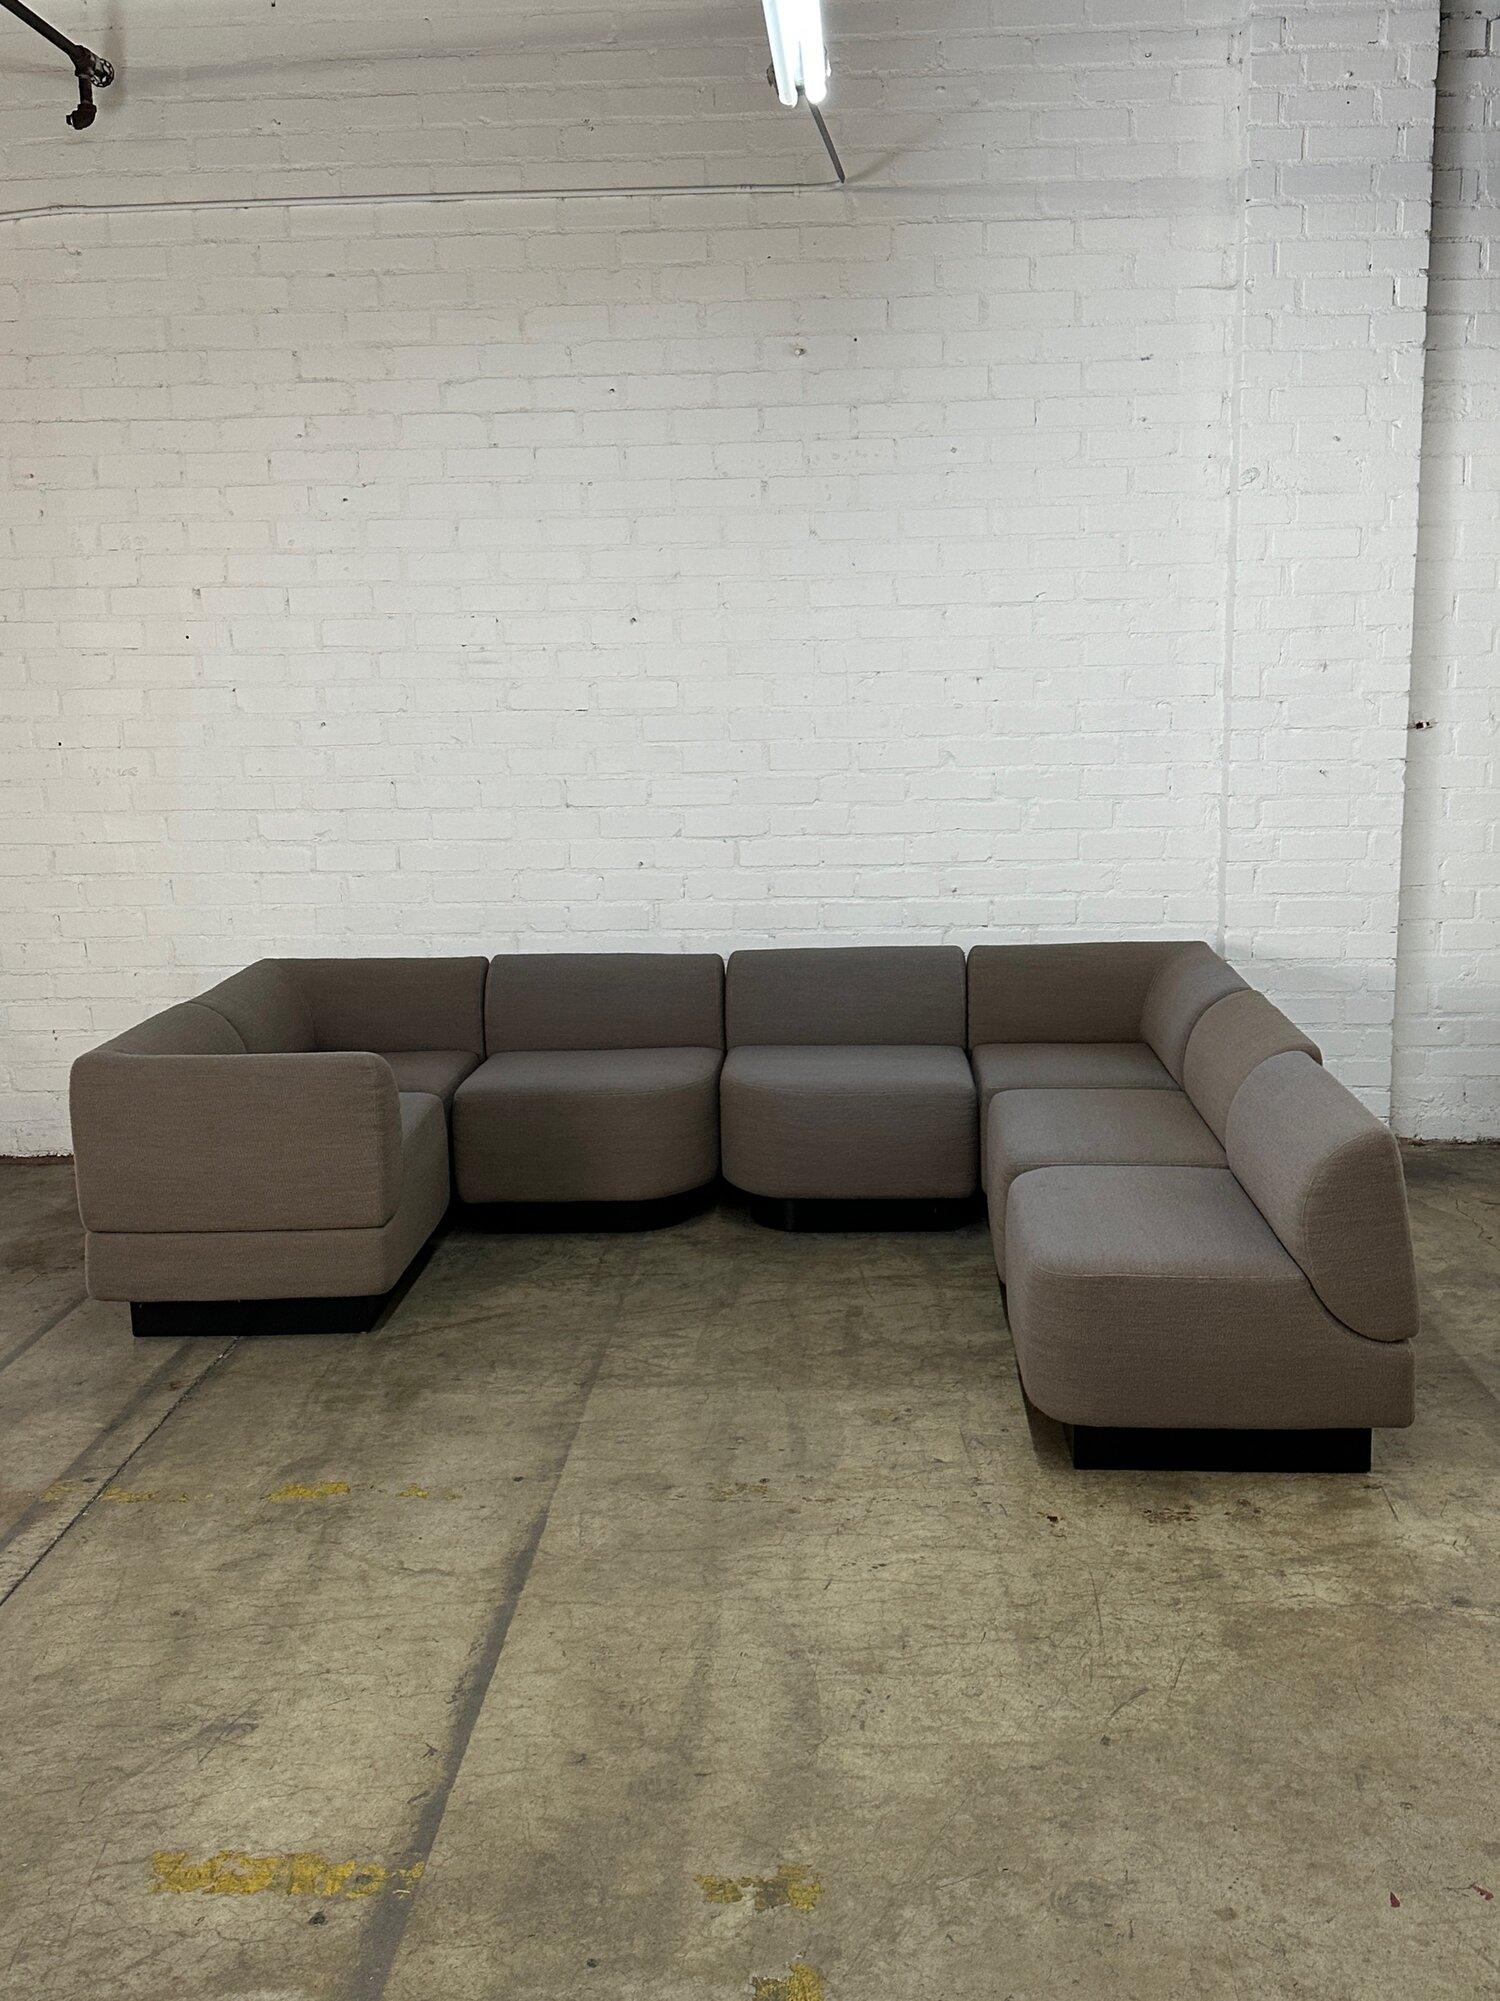 Modular seating by Harvey Probber In Good Condition For Sale In Los Angeles, CA